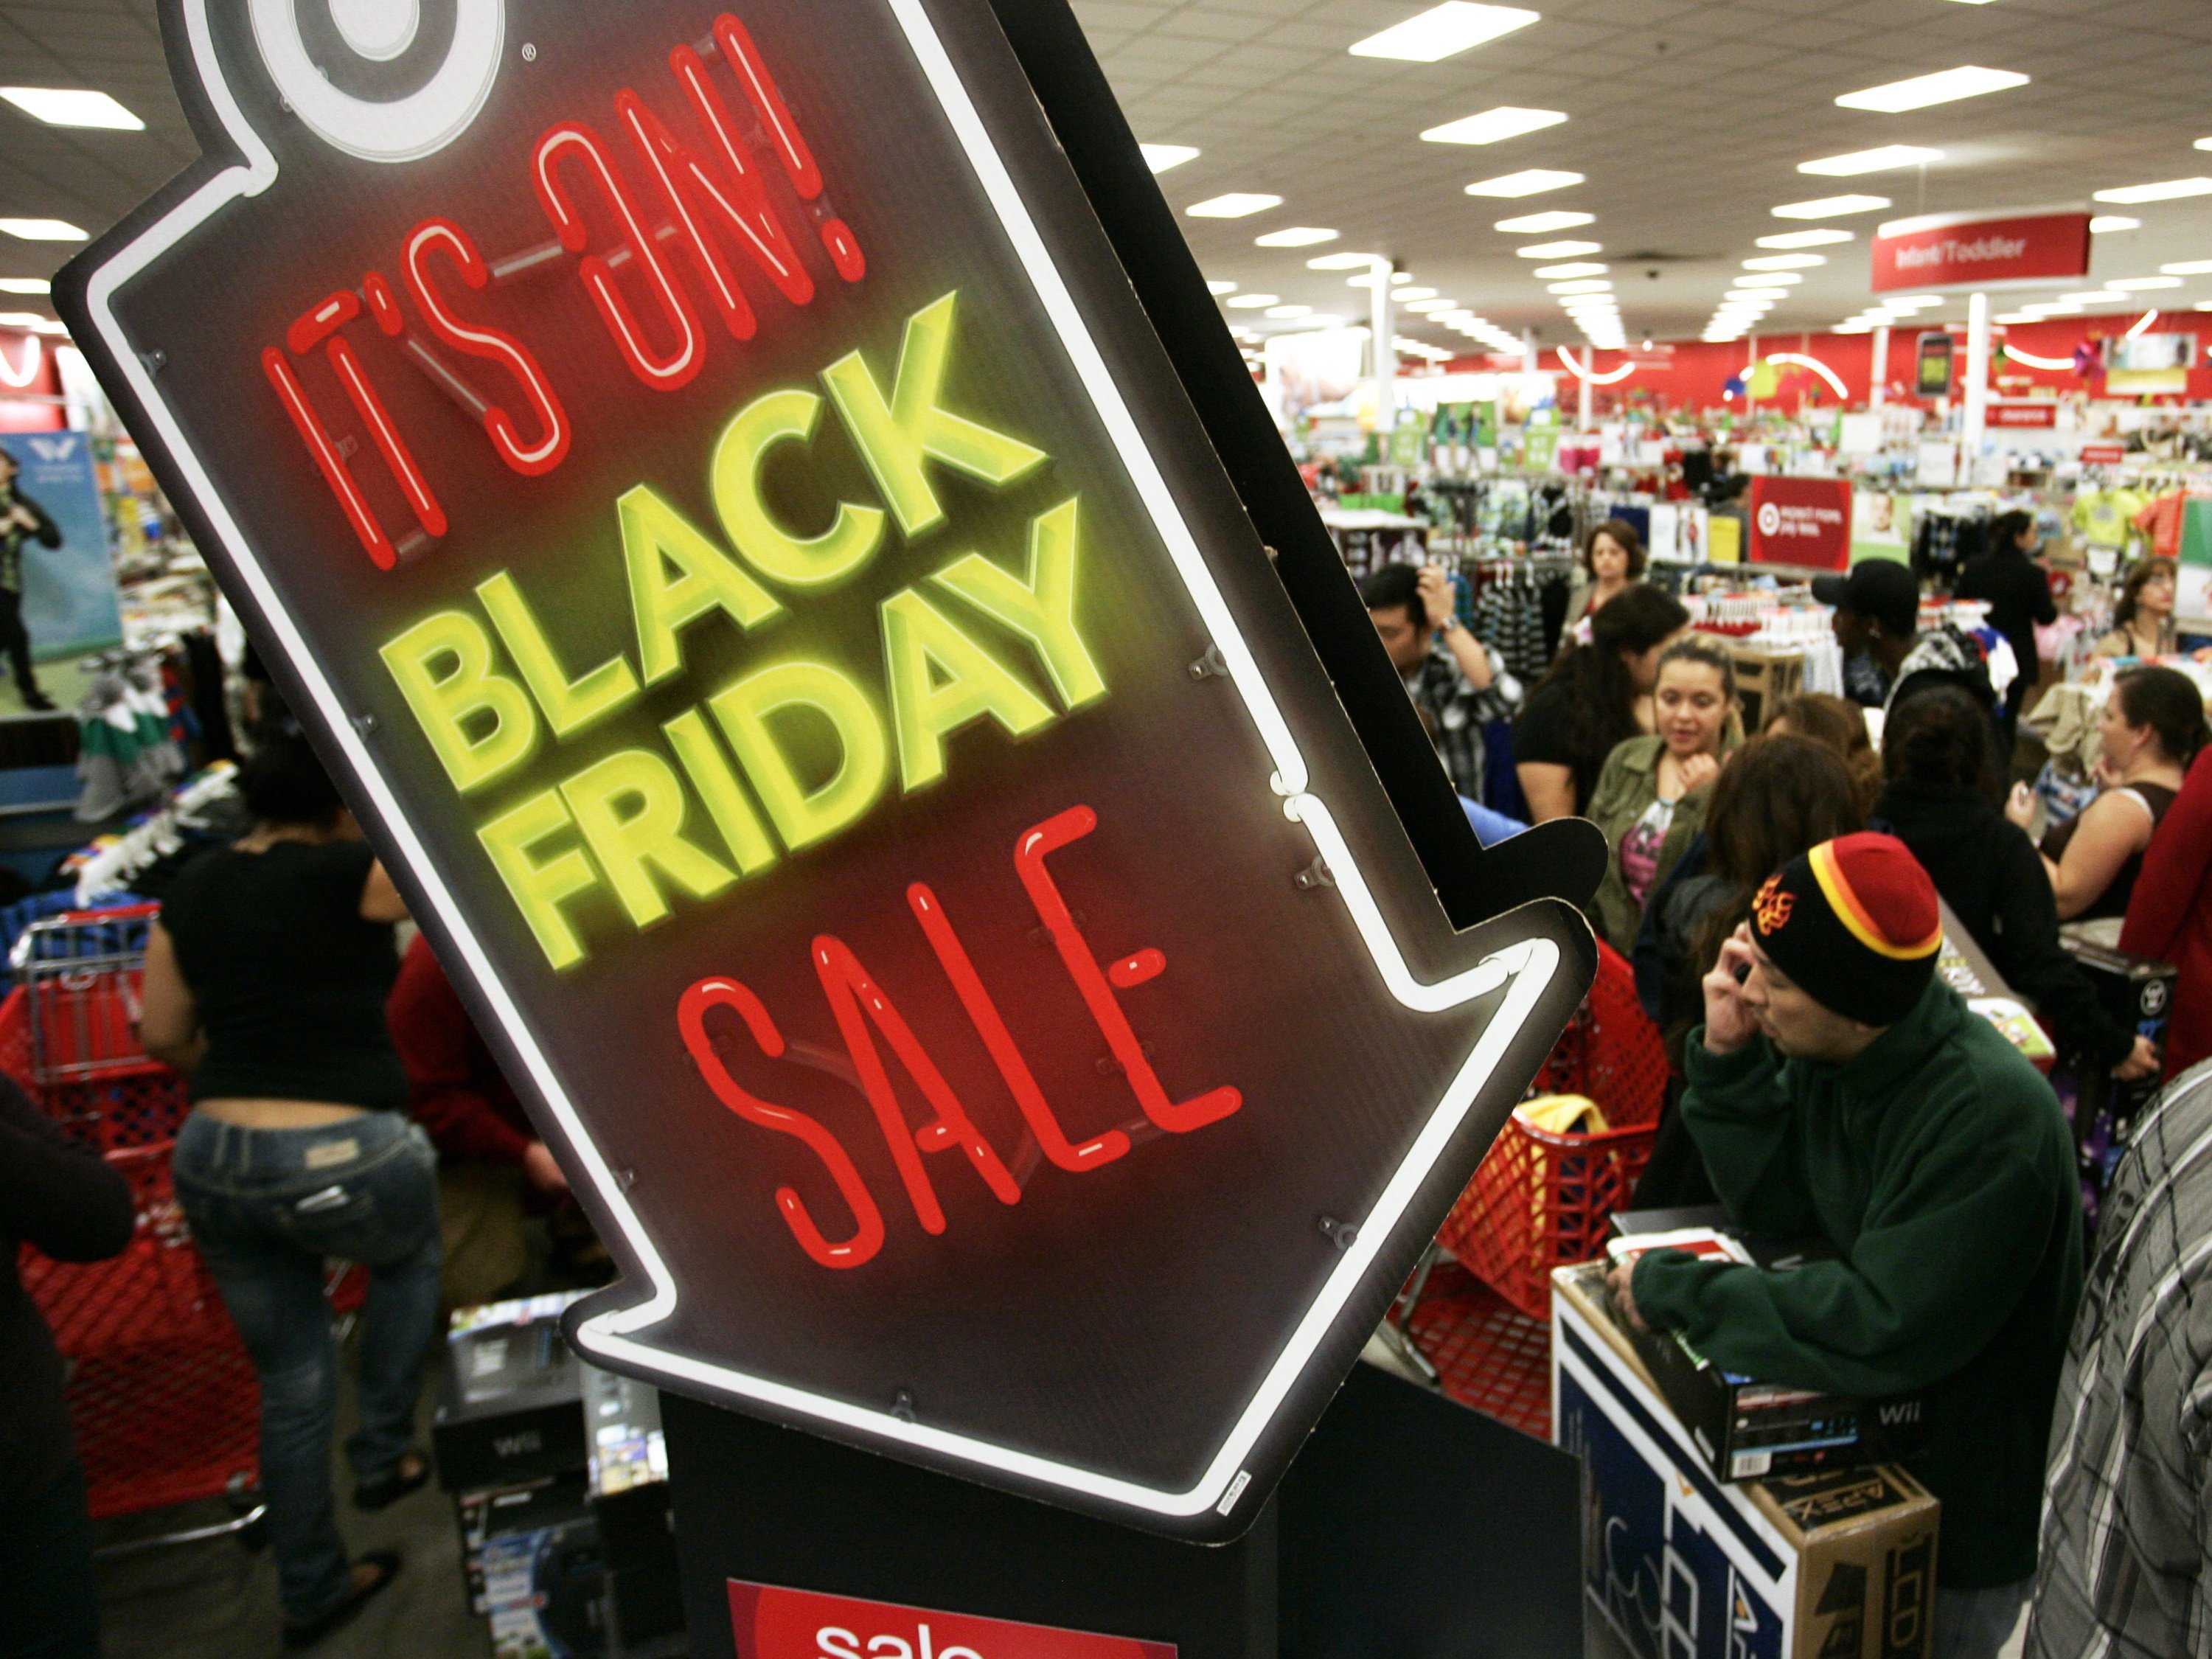 heres-what-not-to-buy-on-black-friday-7-horrific-black-friday-horror-stories-like-something-from-the-purge